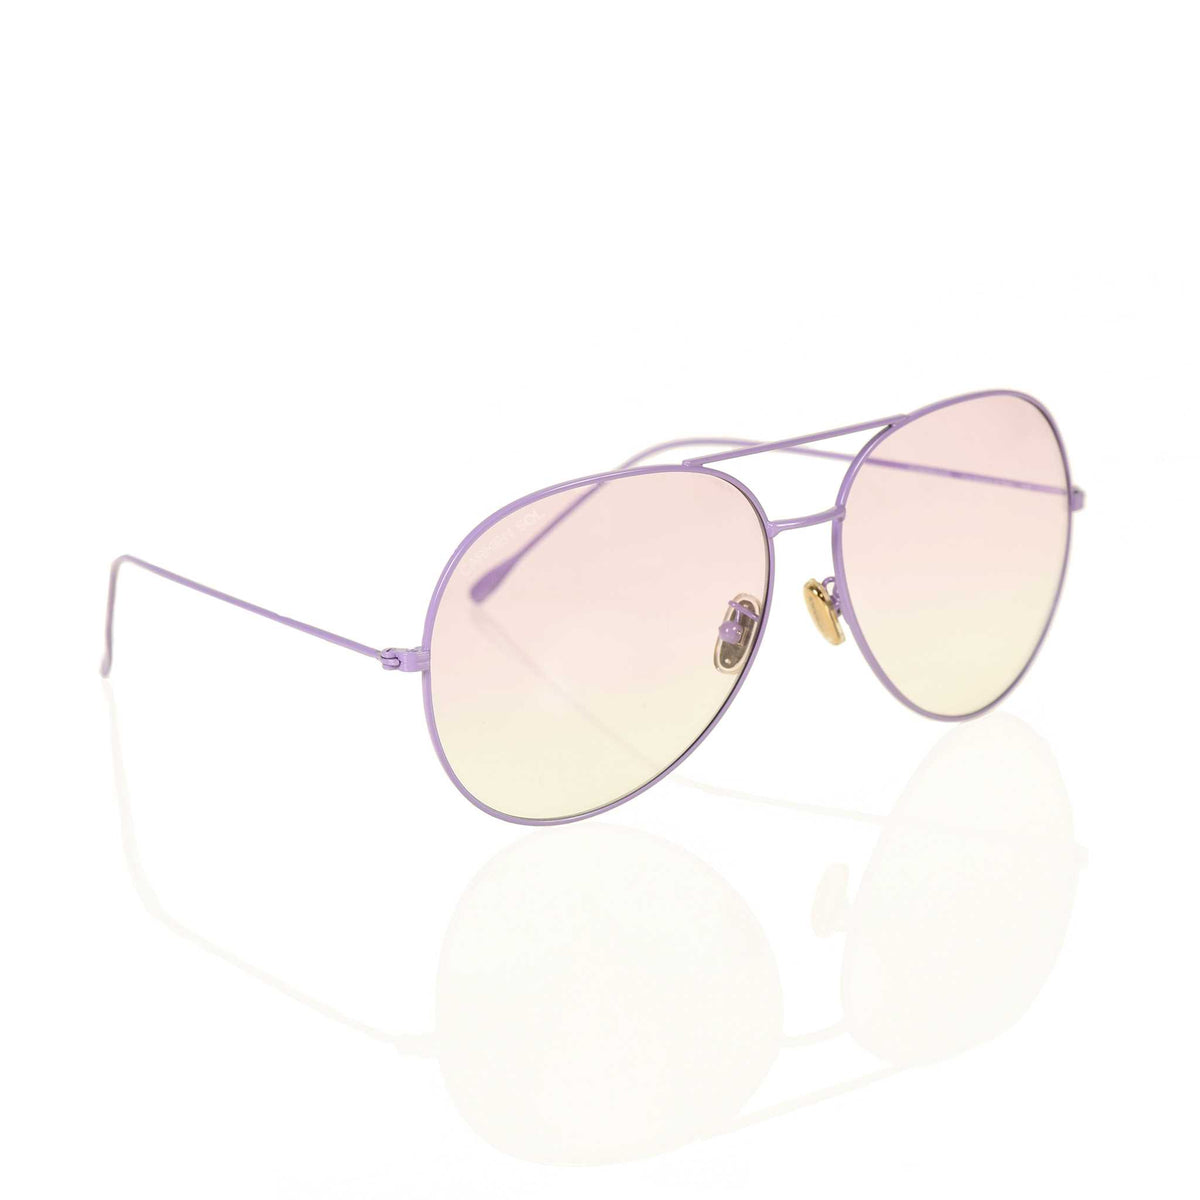 Violet colored sunglasses for women